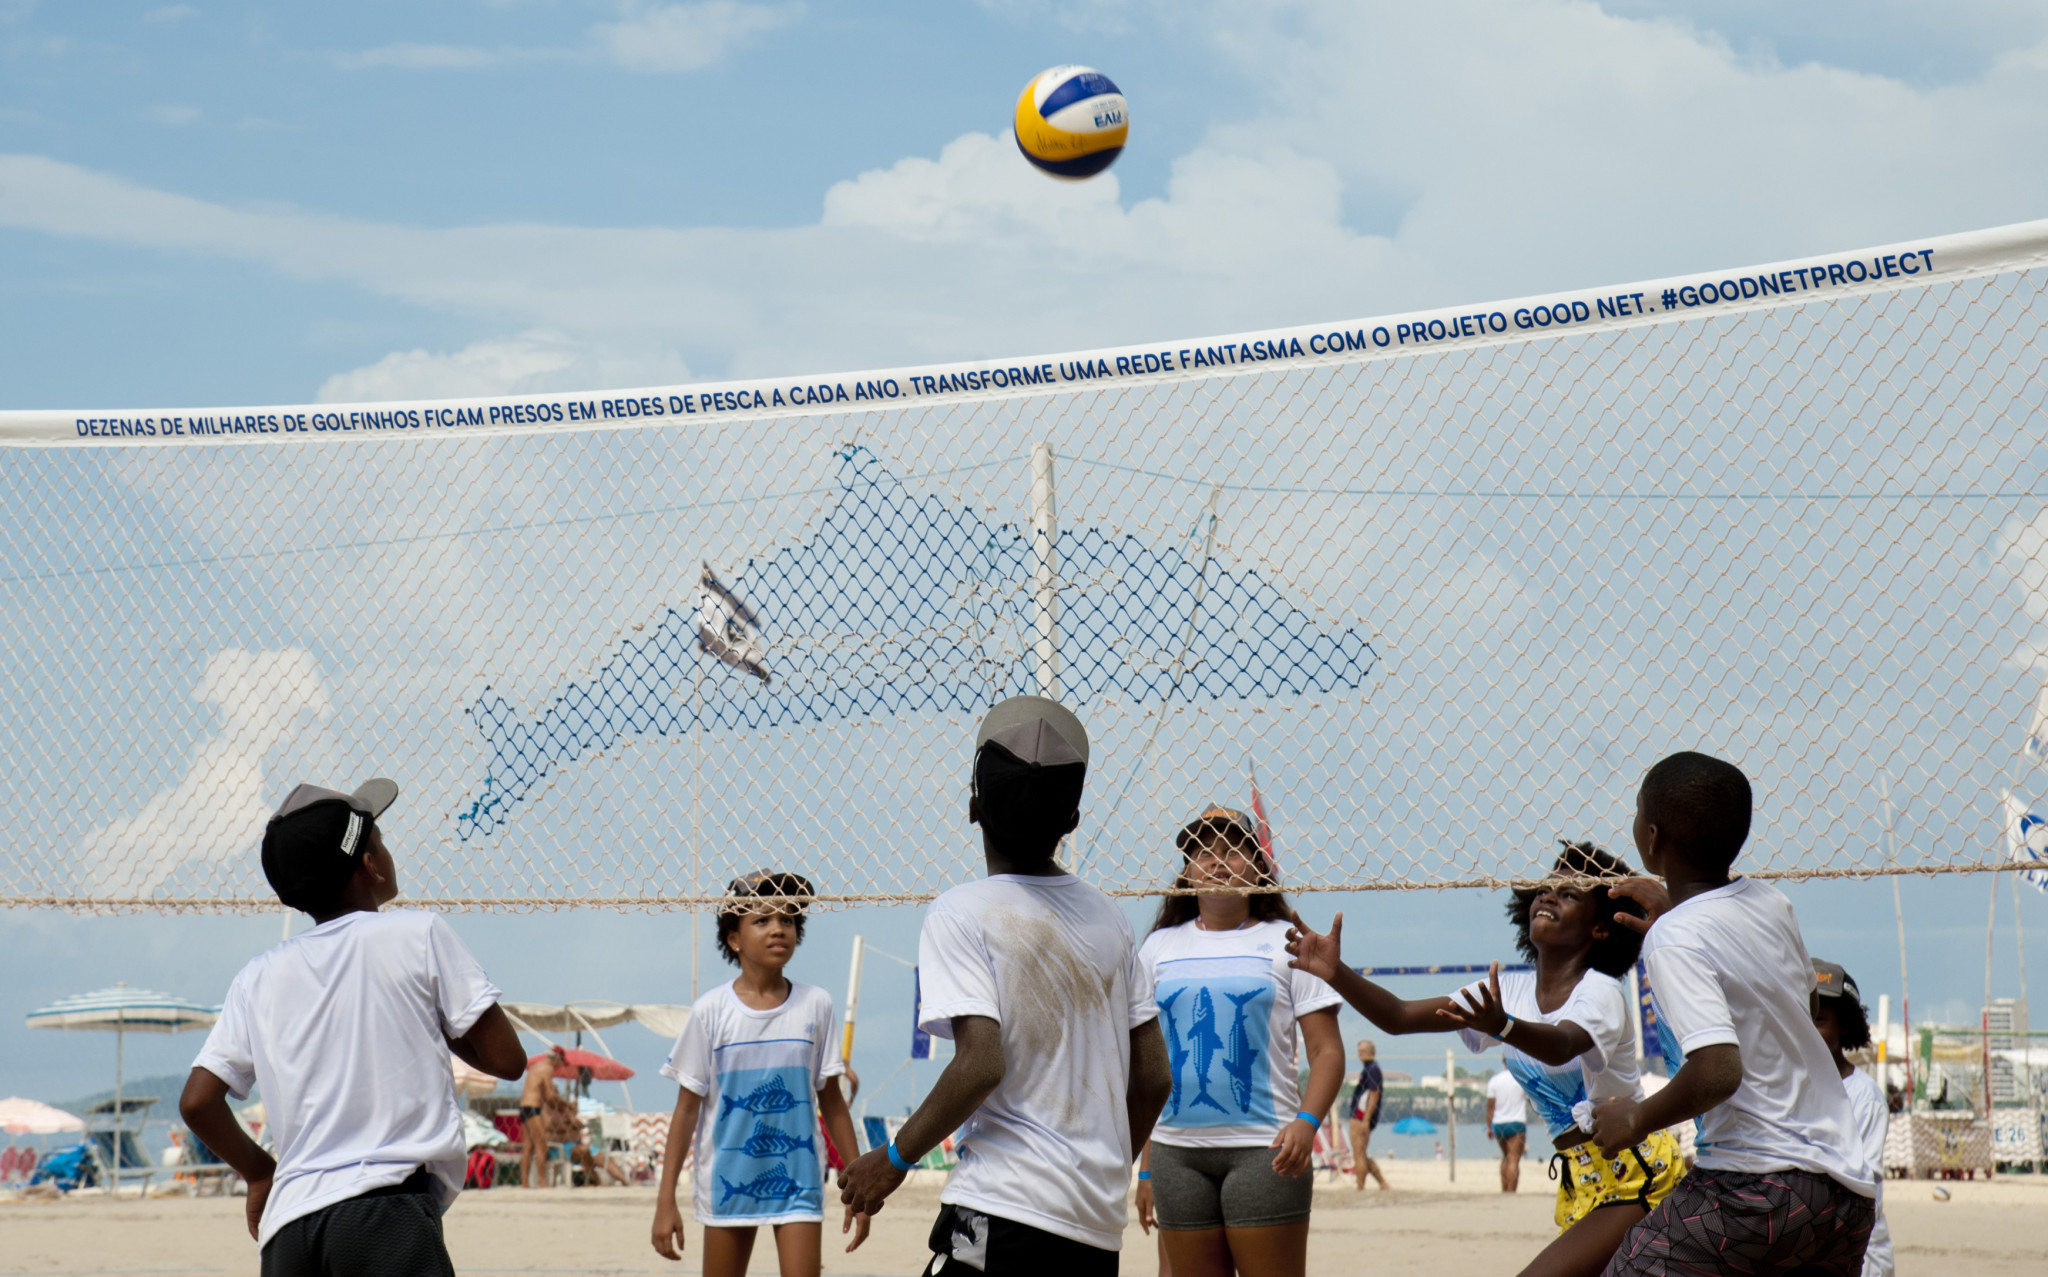 FIVB team up with Ghost Fishing Foundation to launch Good Net project